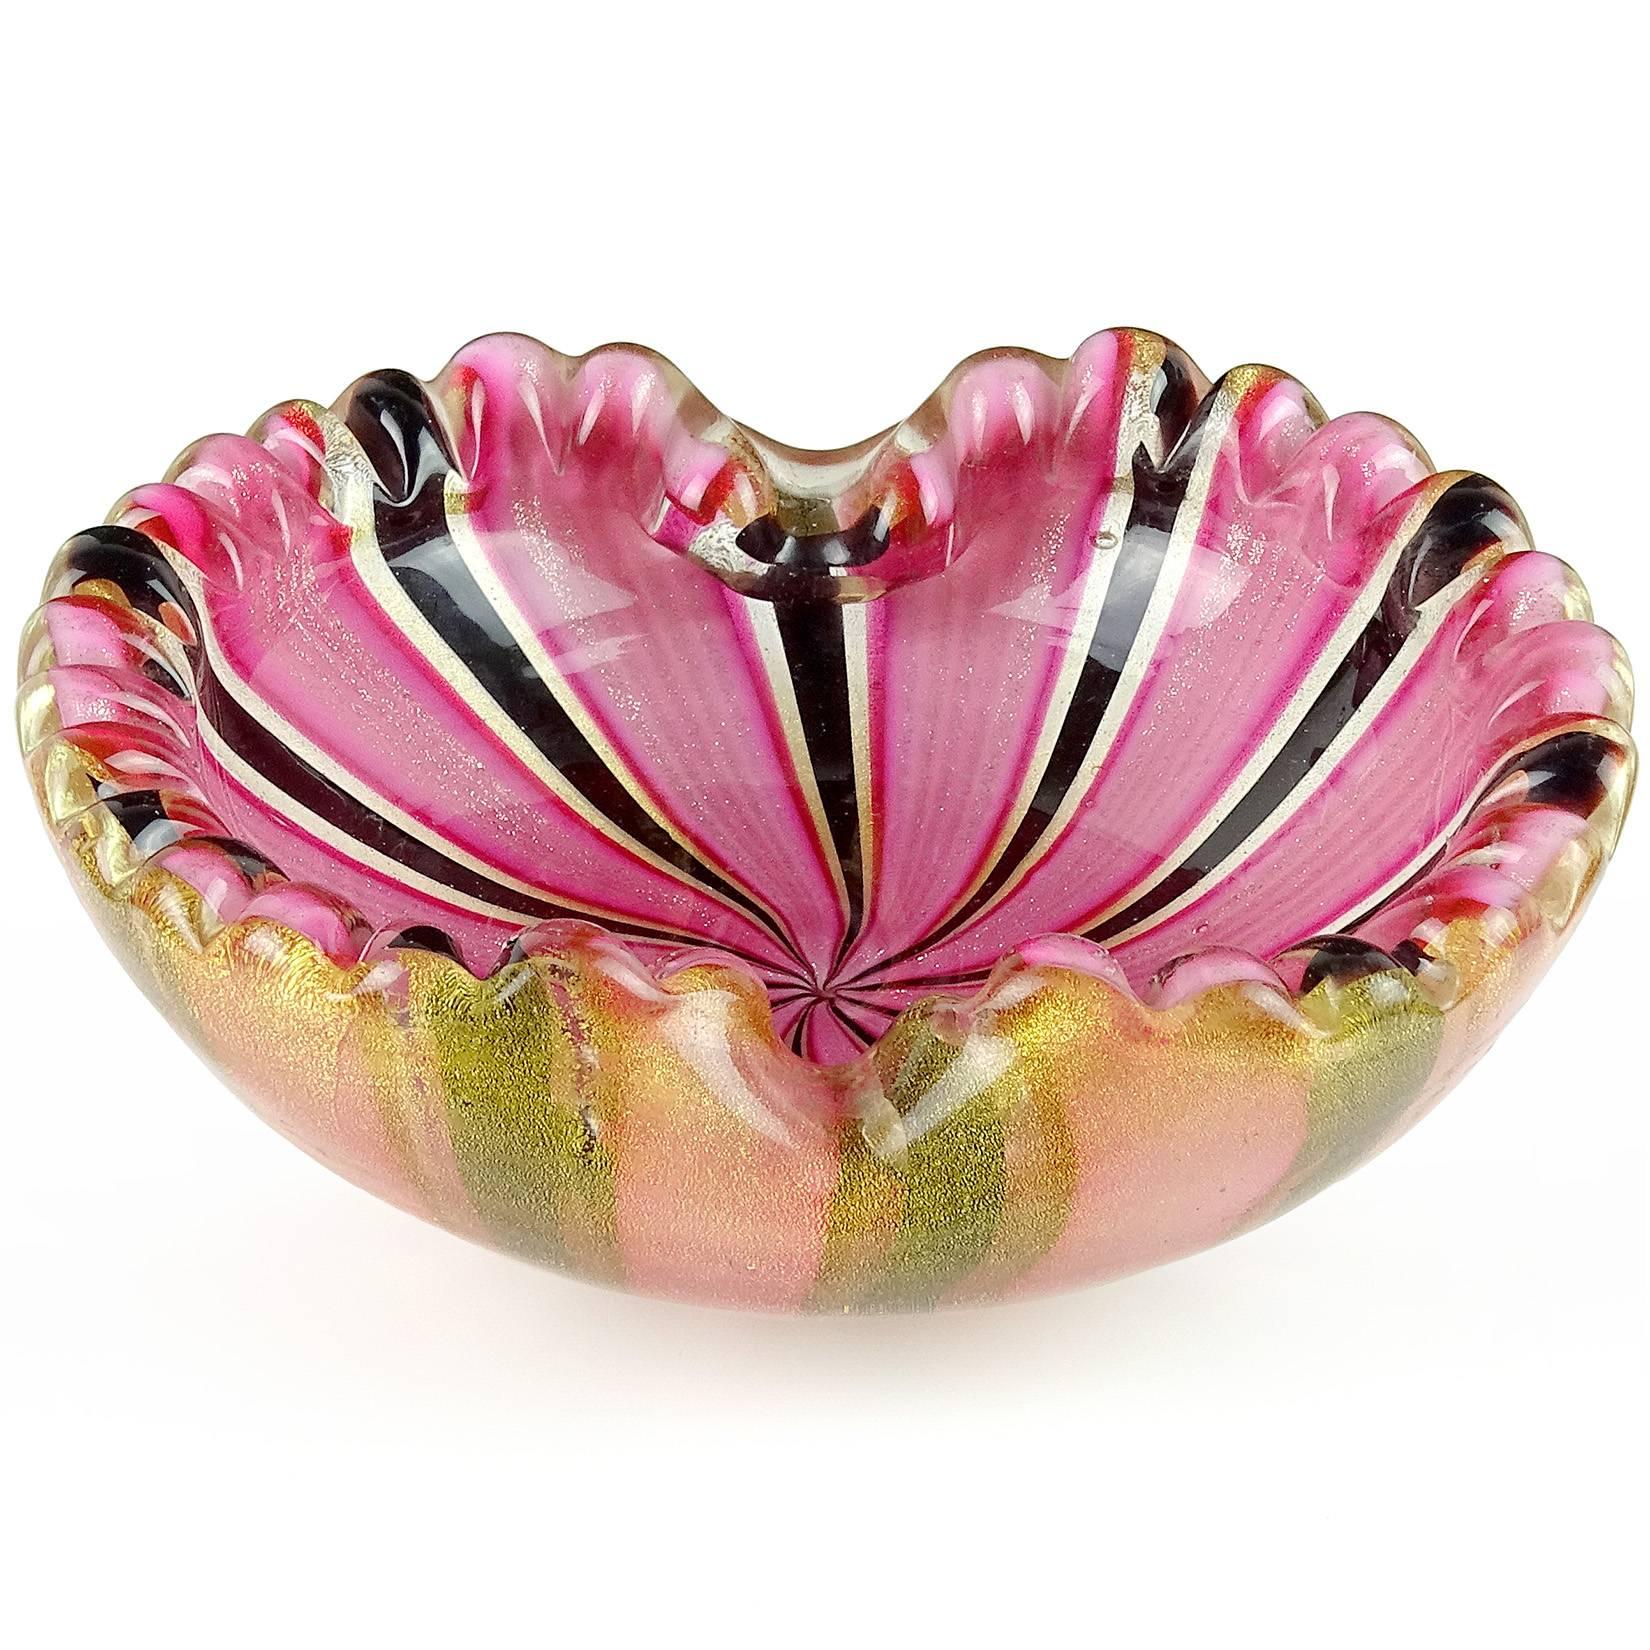 Beautiful vintage Murano hand blown pink, black, aventurine and gold flecks Italian art glass decorative bowl. Attributed to Dino Martens for Aureliano Toso. The bowl is made with 